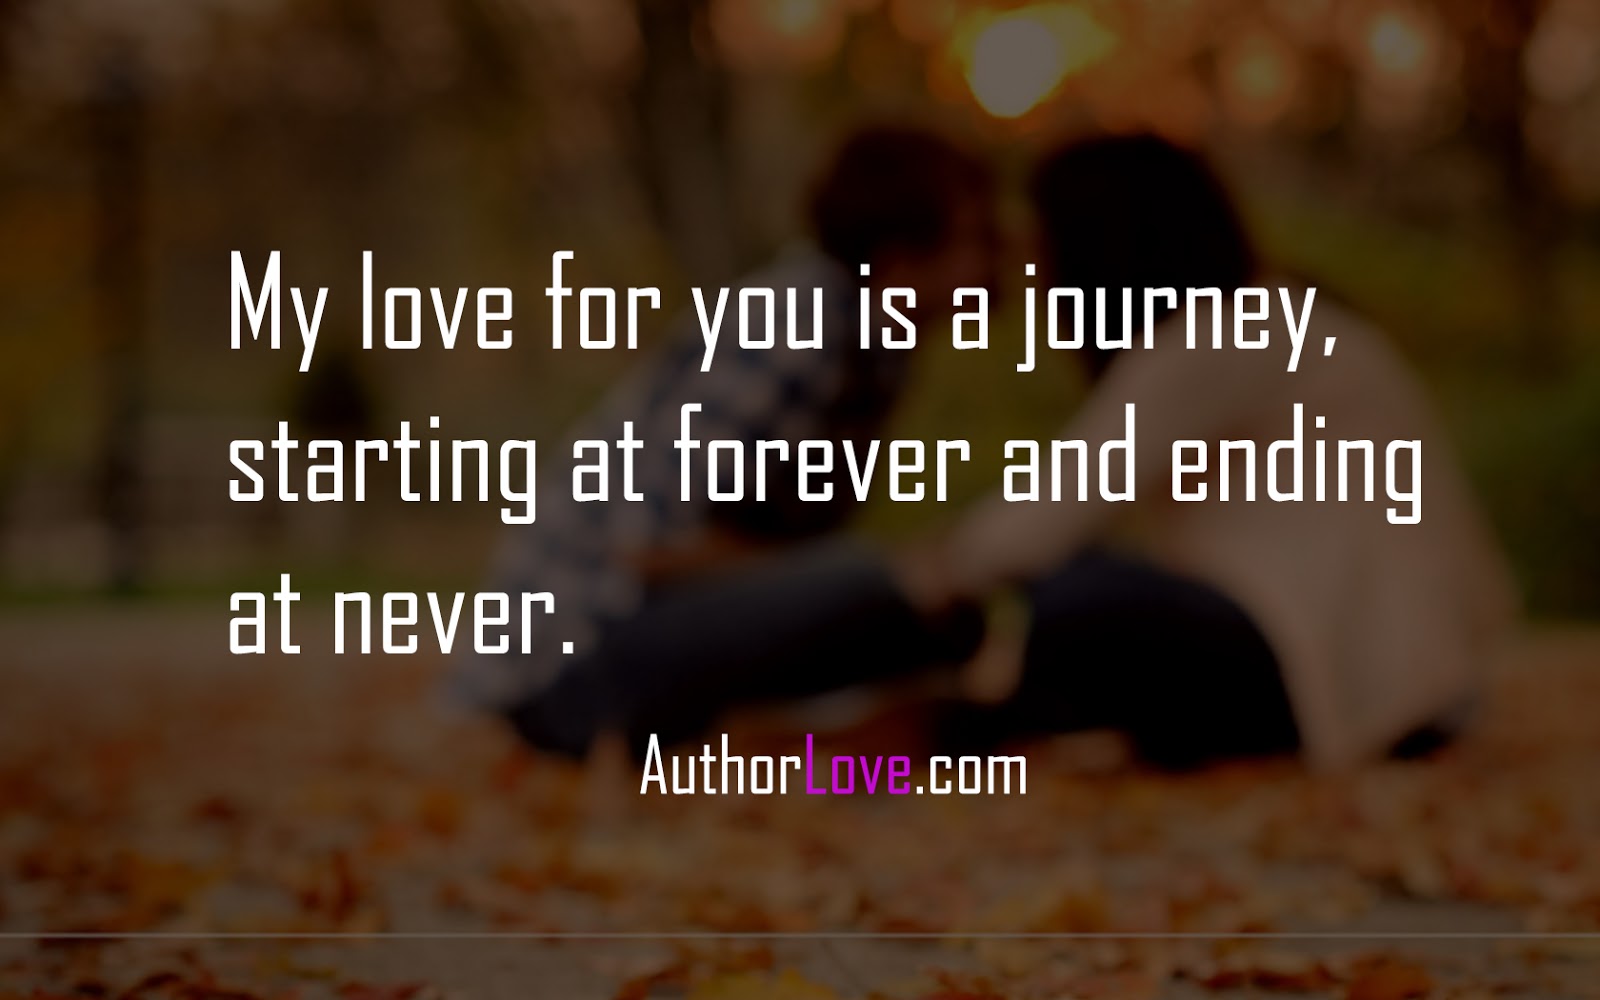  My  love  for you  is a journey  starting  at forever  and 